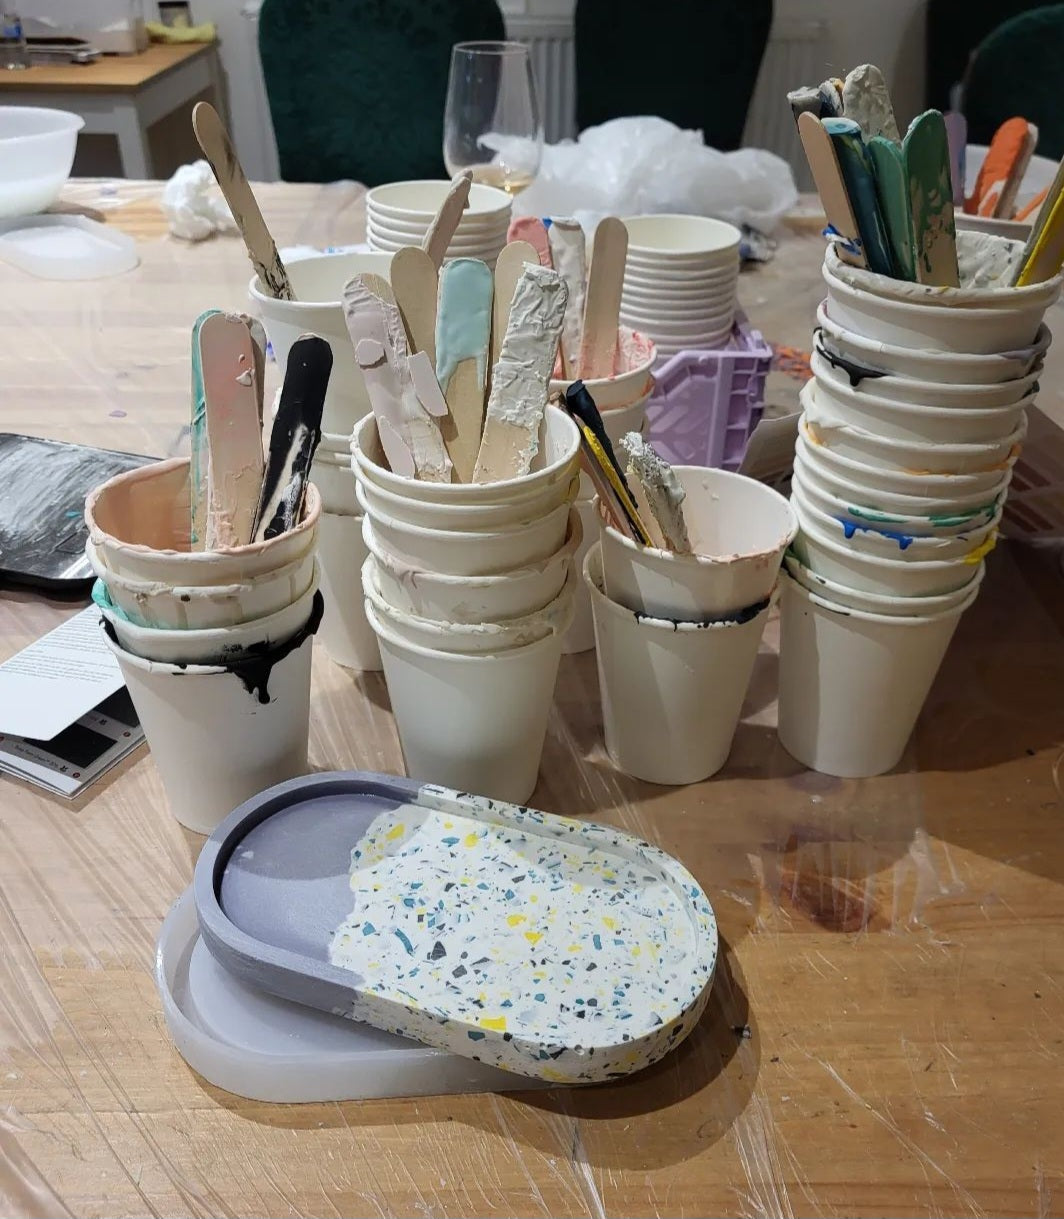 Gipsy Hill Taproom - Jesmonite Terrazzo Workshop - Sunday Afternoons